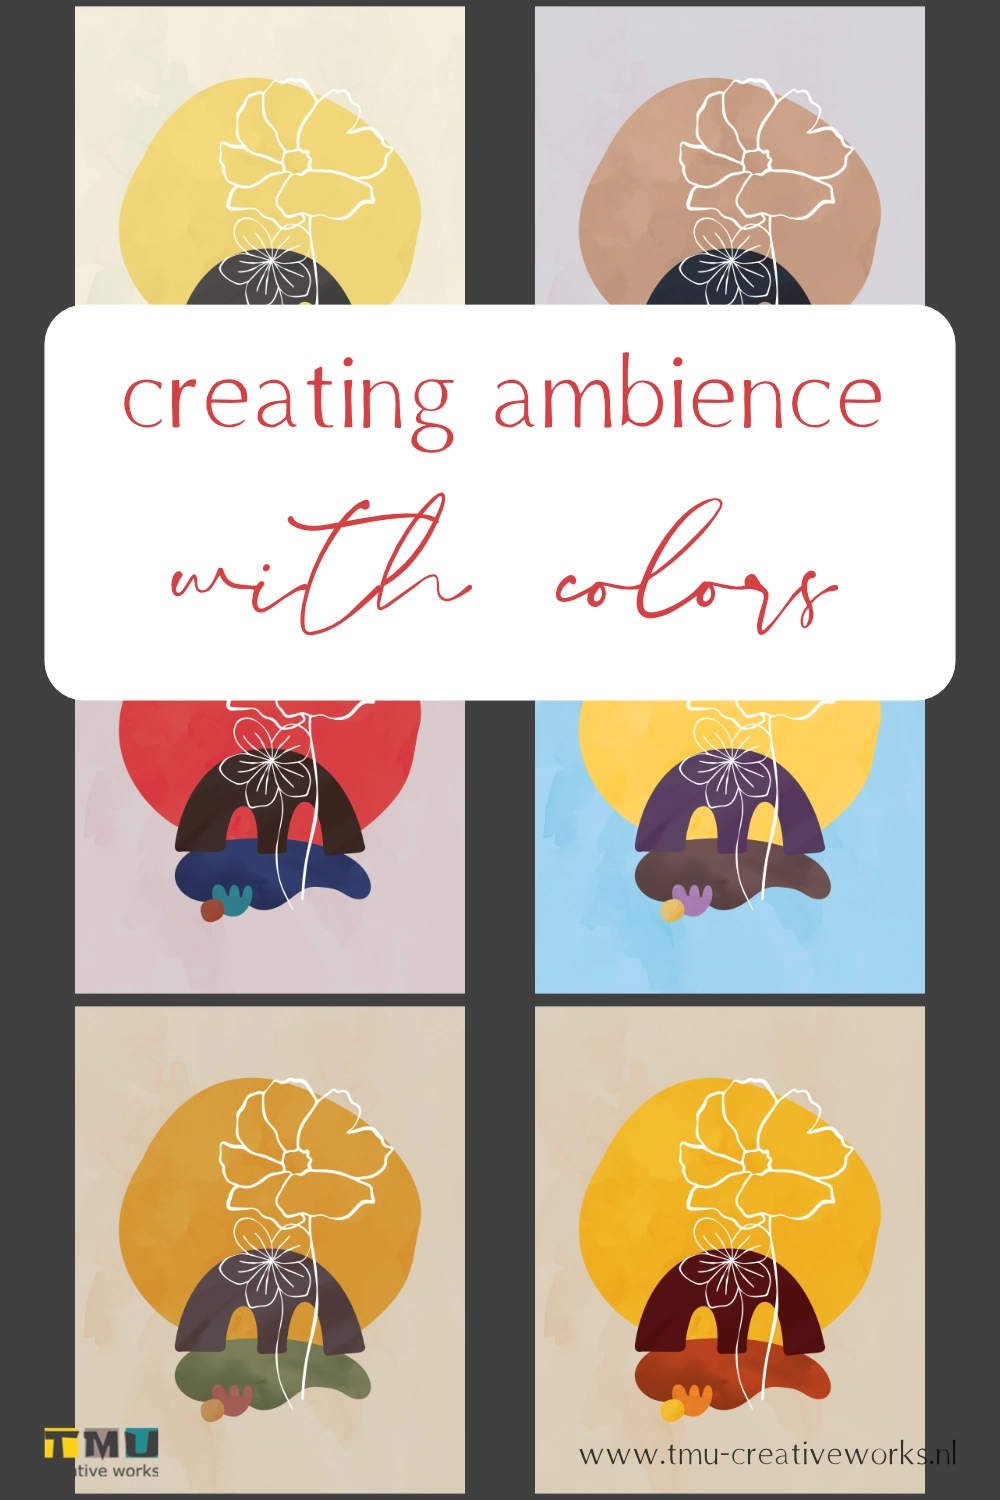 Creating ambience with colors